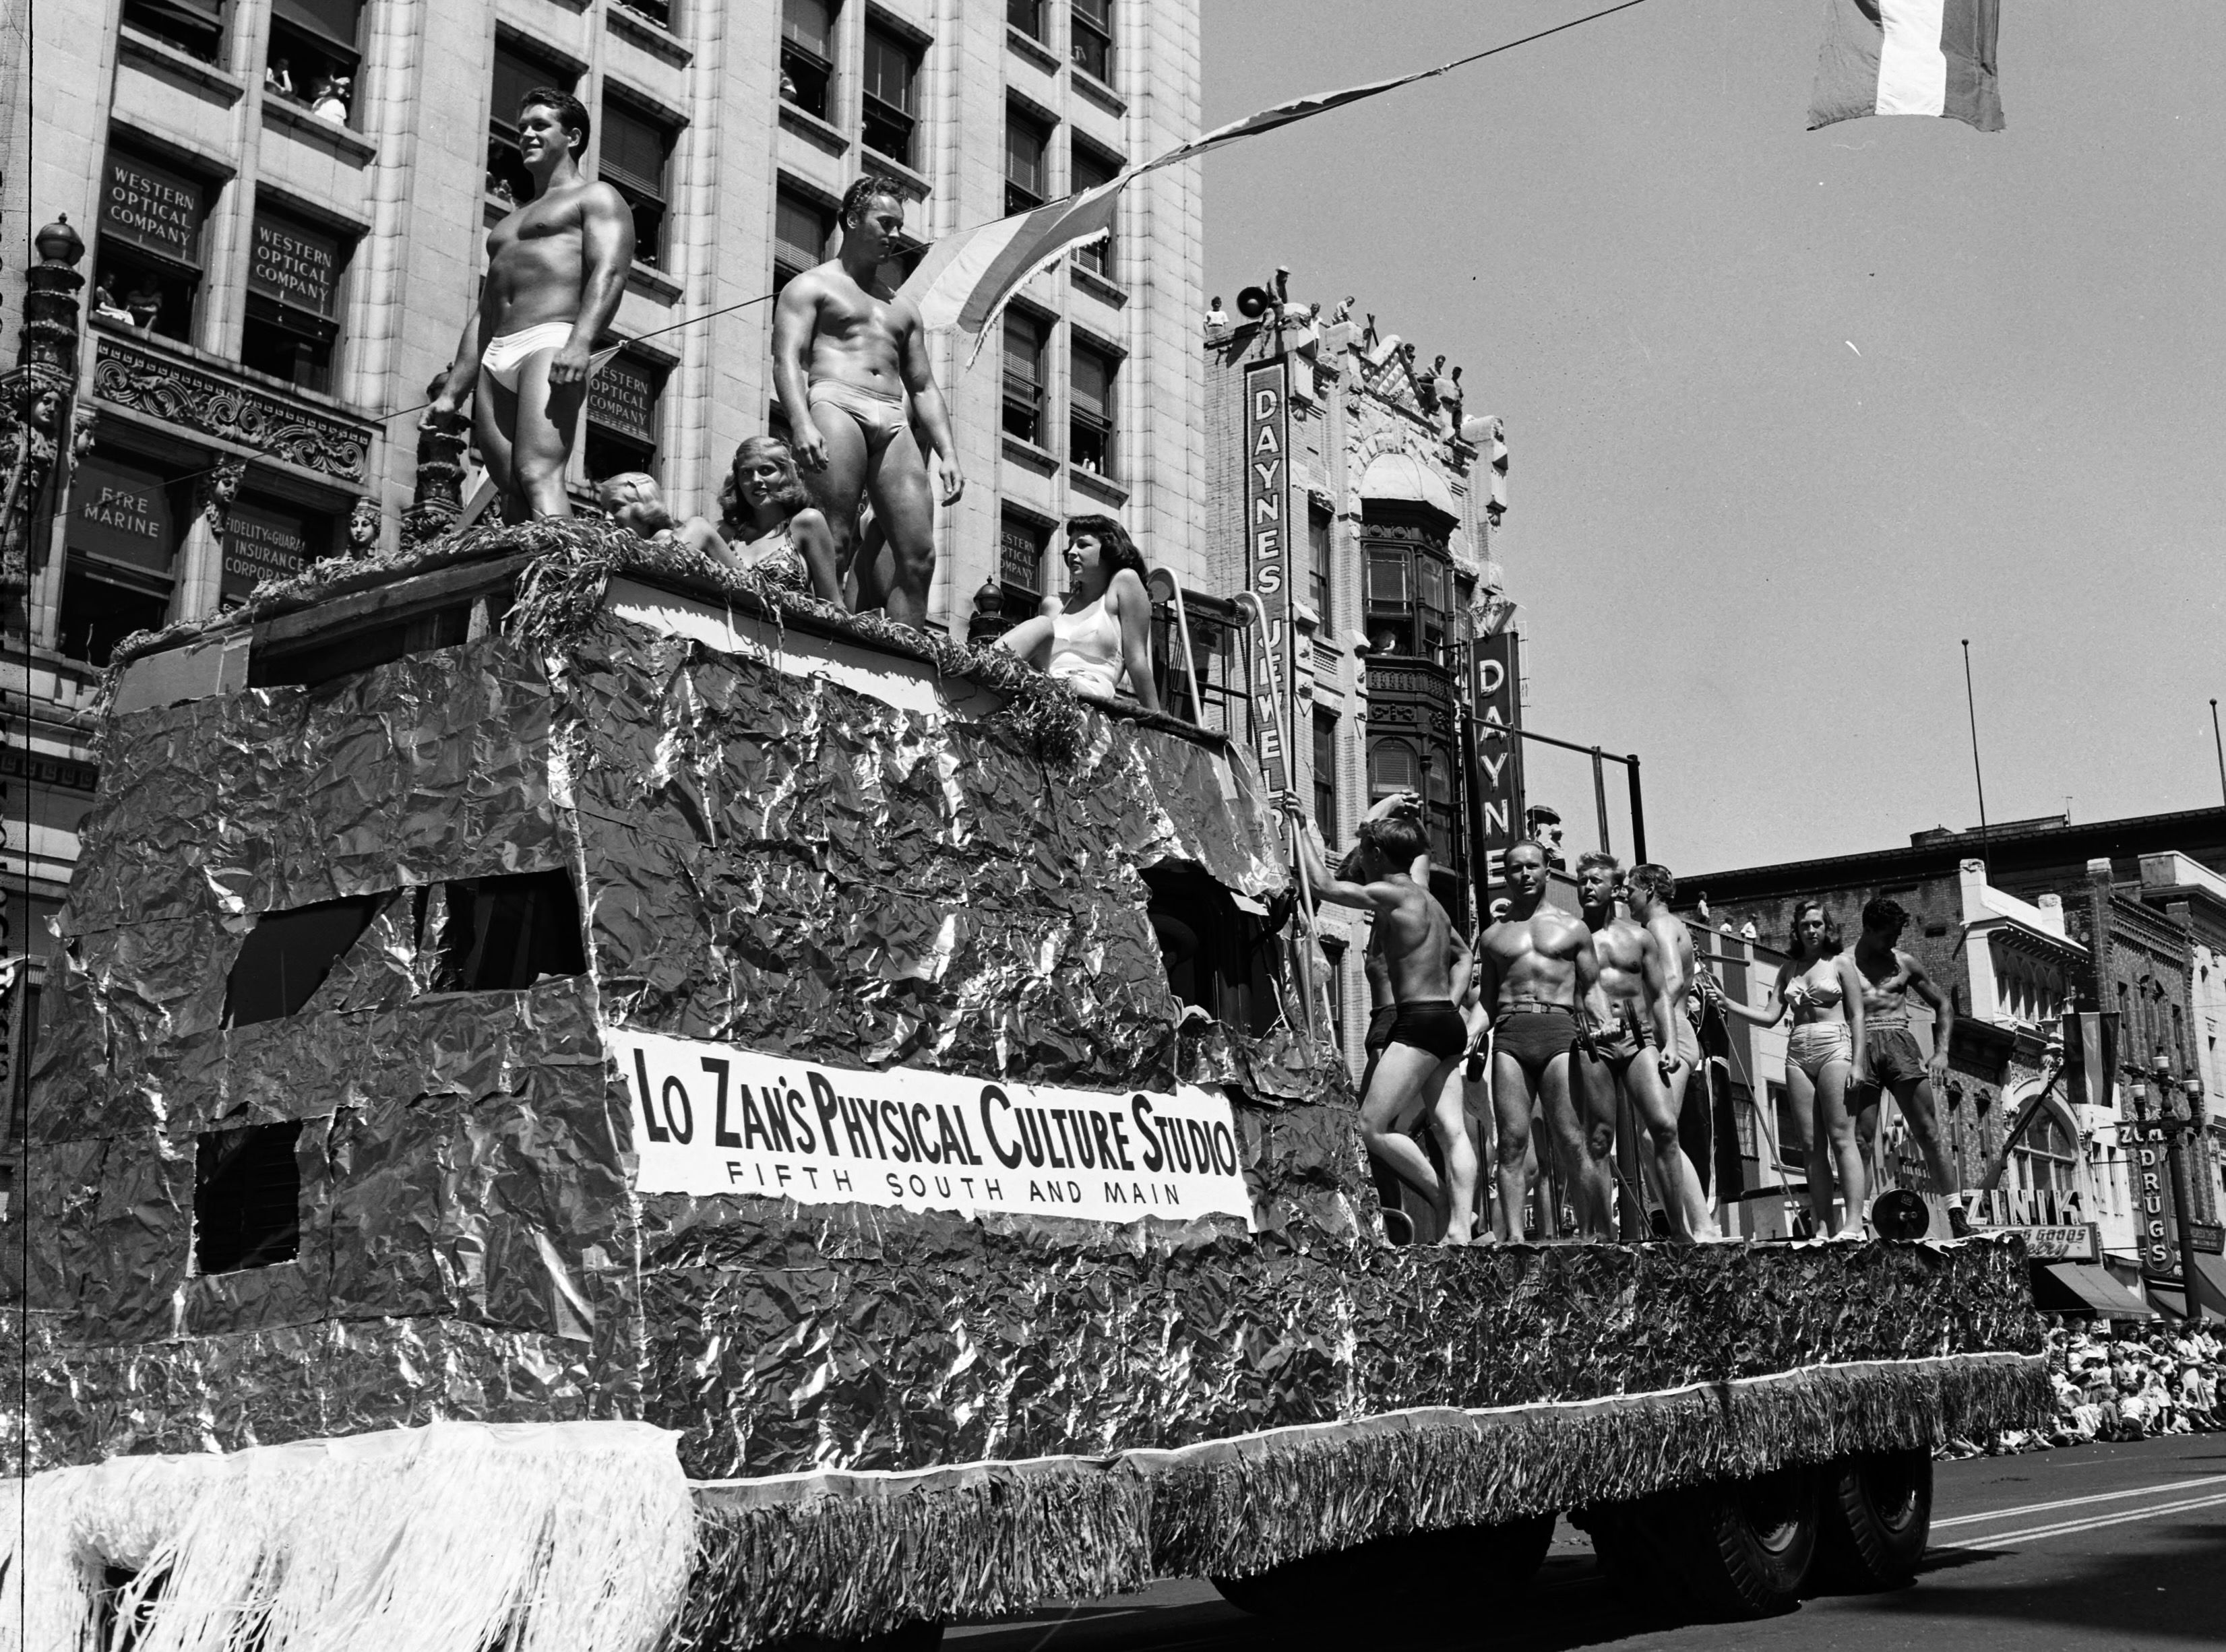 Body builders on a parade float in briefs, 1949.